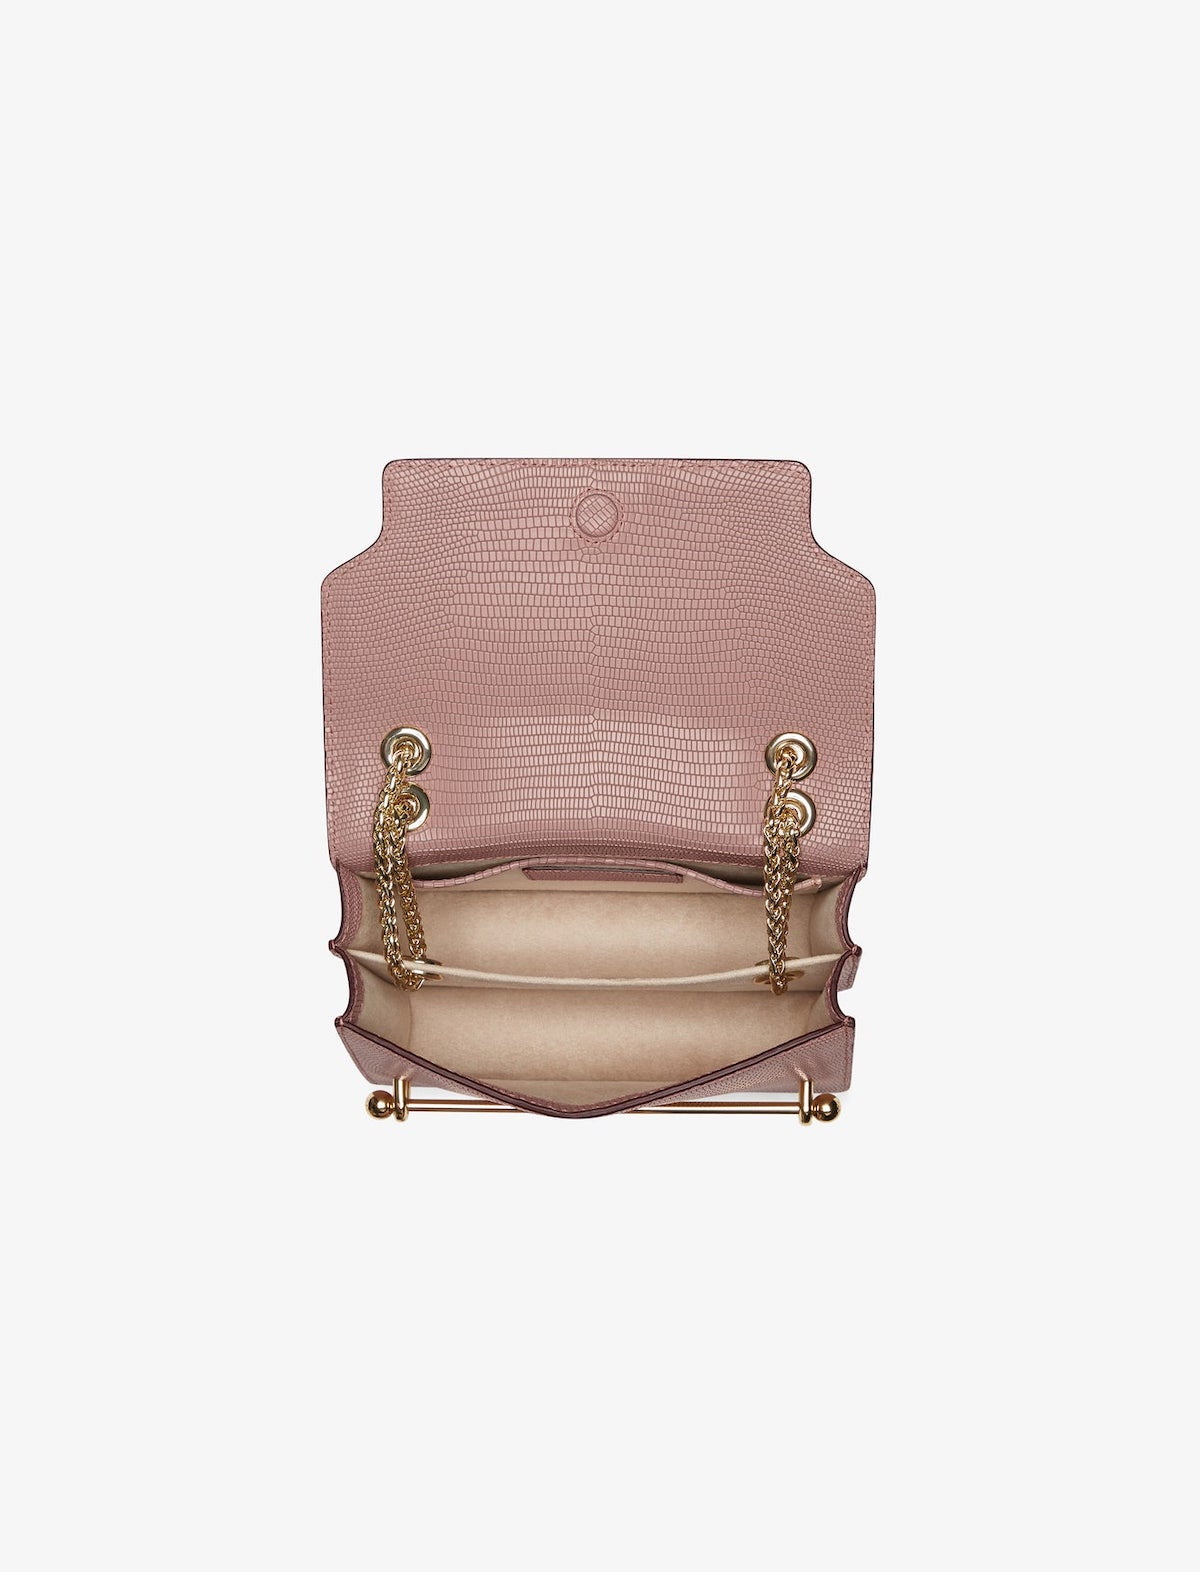 STRATHBERRY East/West Mini Bag in Embossed Blush Rose